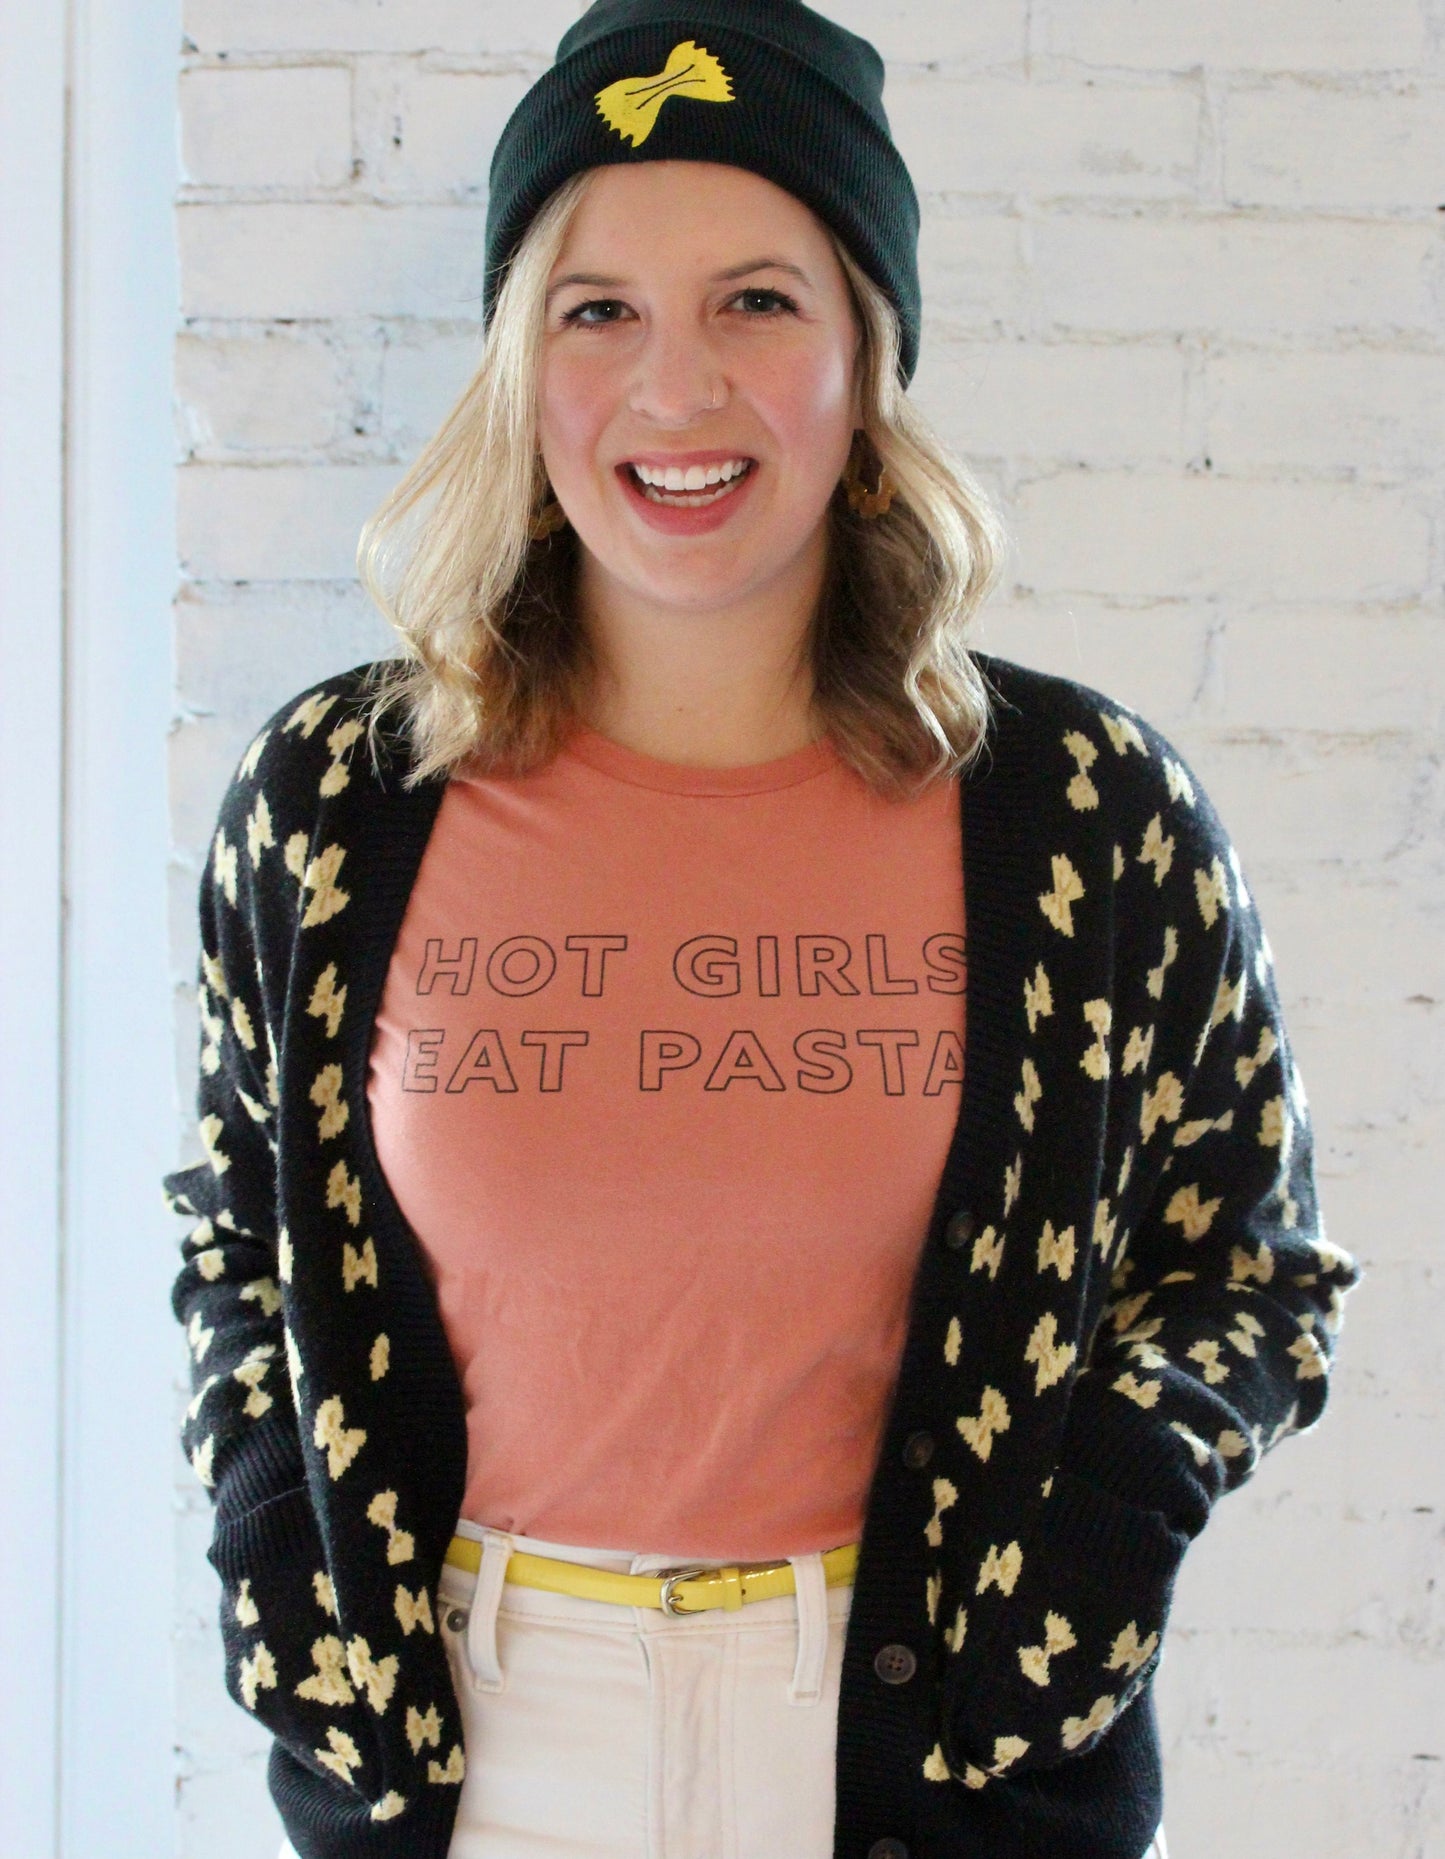 A woman wears a peach tee with the words Hot Girls Eat Pasta and a sweater and hat with a pasta design.